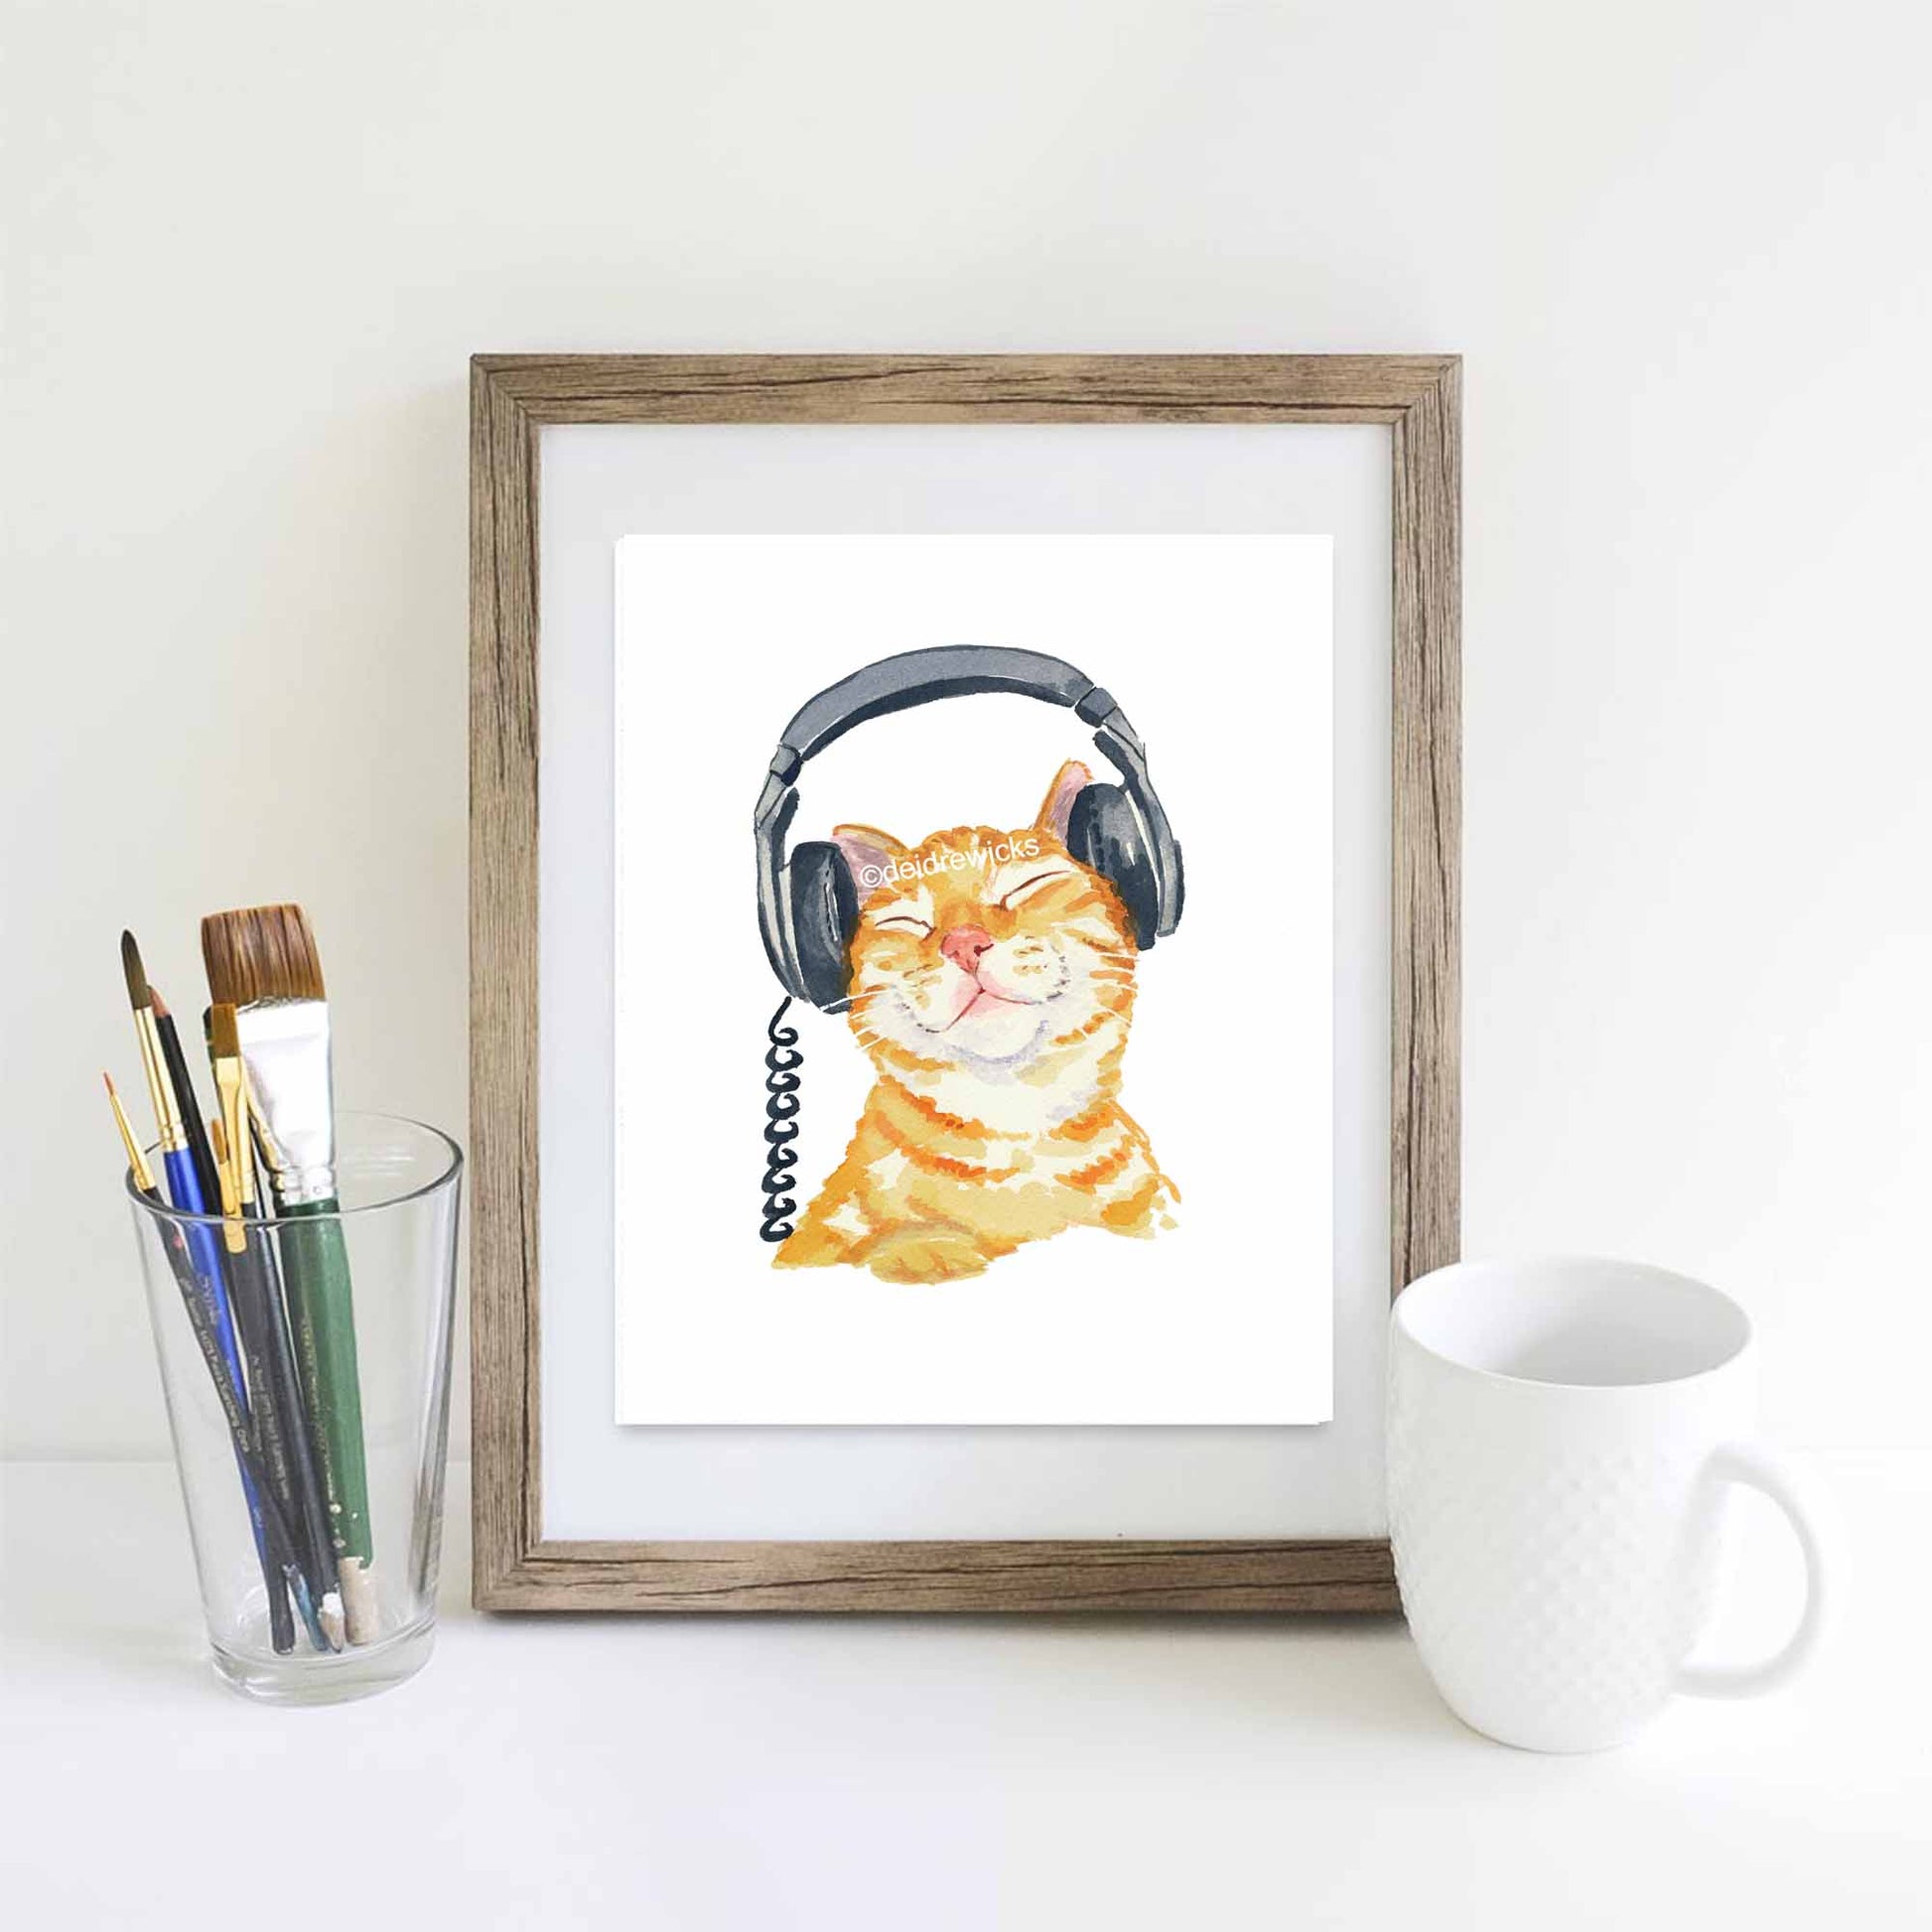 Example of how to frame an orange tabby cat watercolour print by artist Deidre Wicks